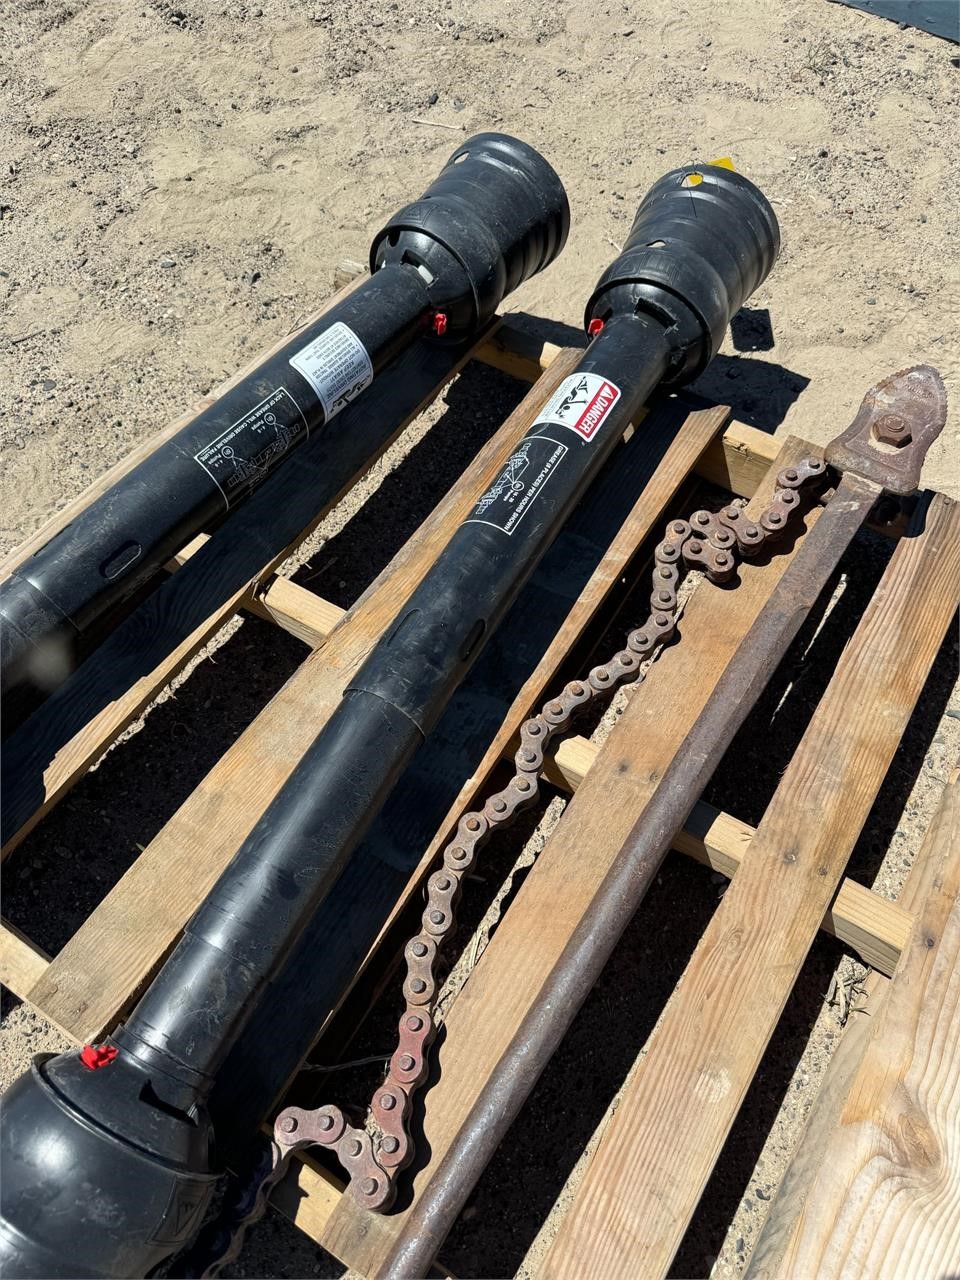 PTO Shaft Guards (2) and Chain Pipe Wrench